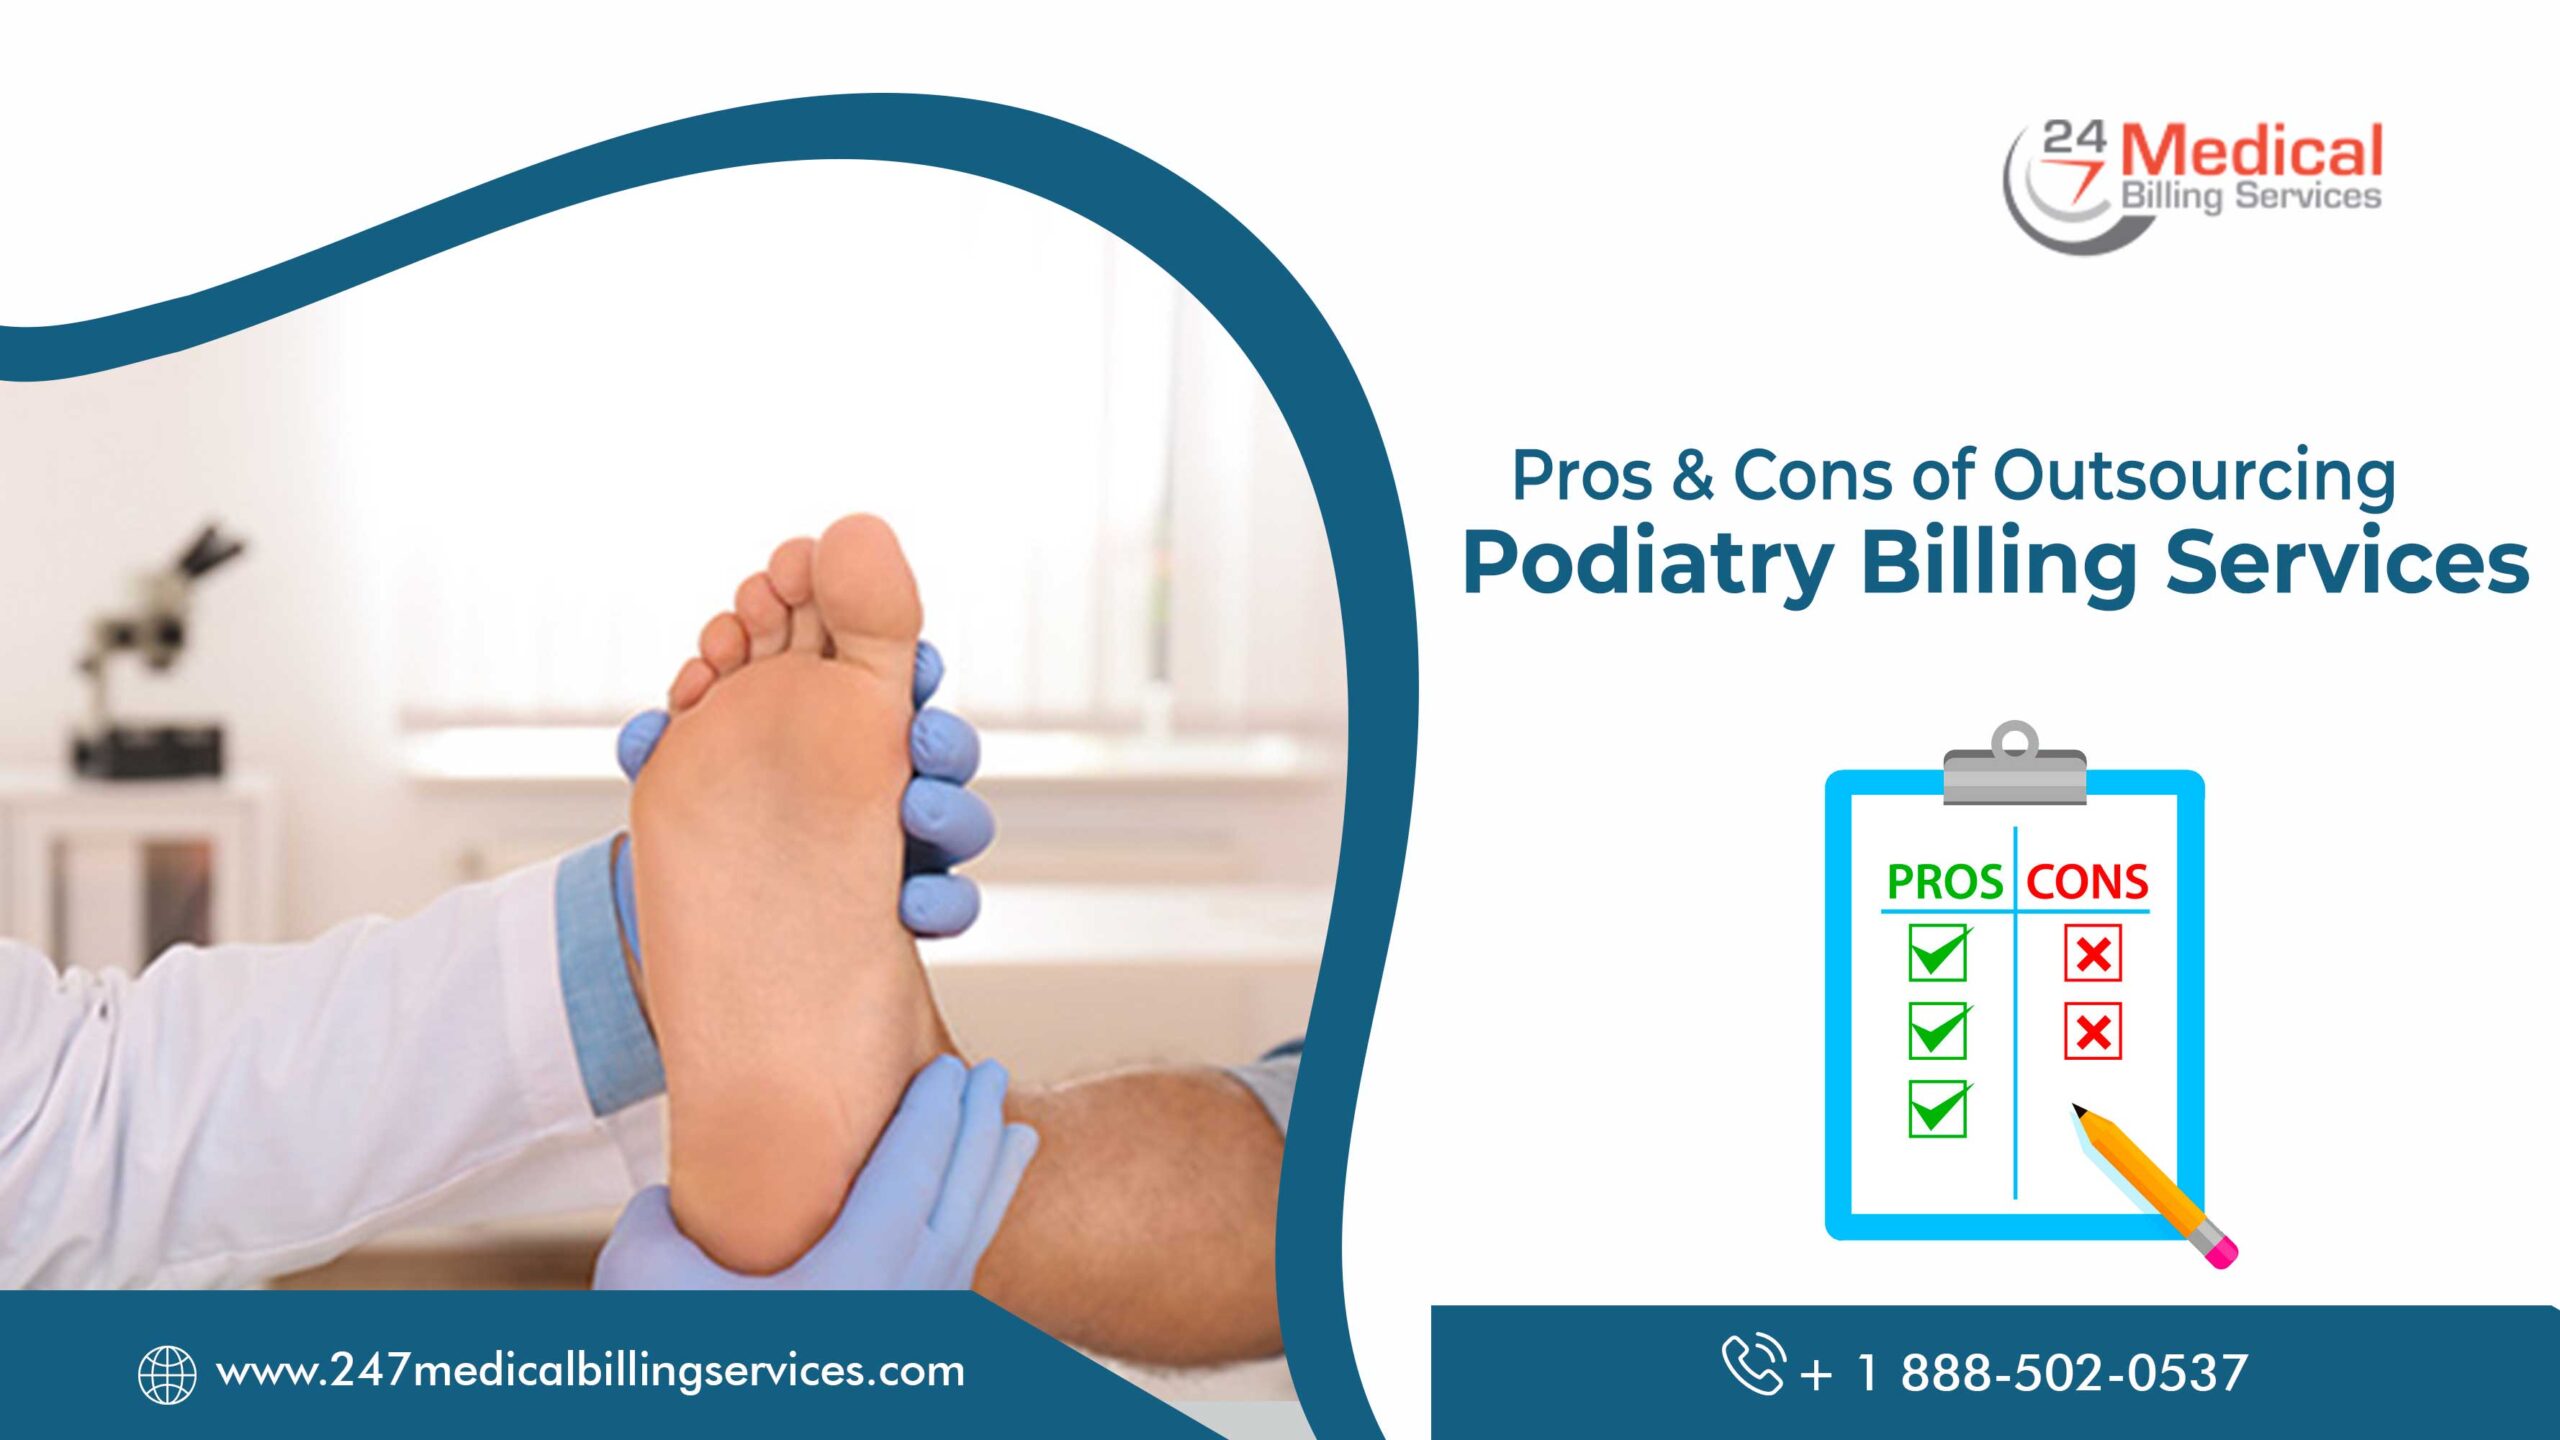  Pros & Cons of Outsourcing Podiatry Billing Services